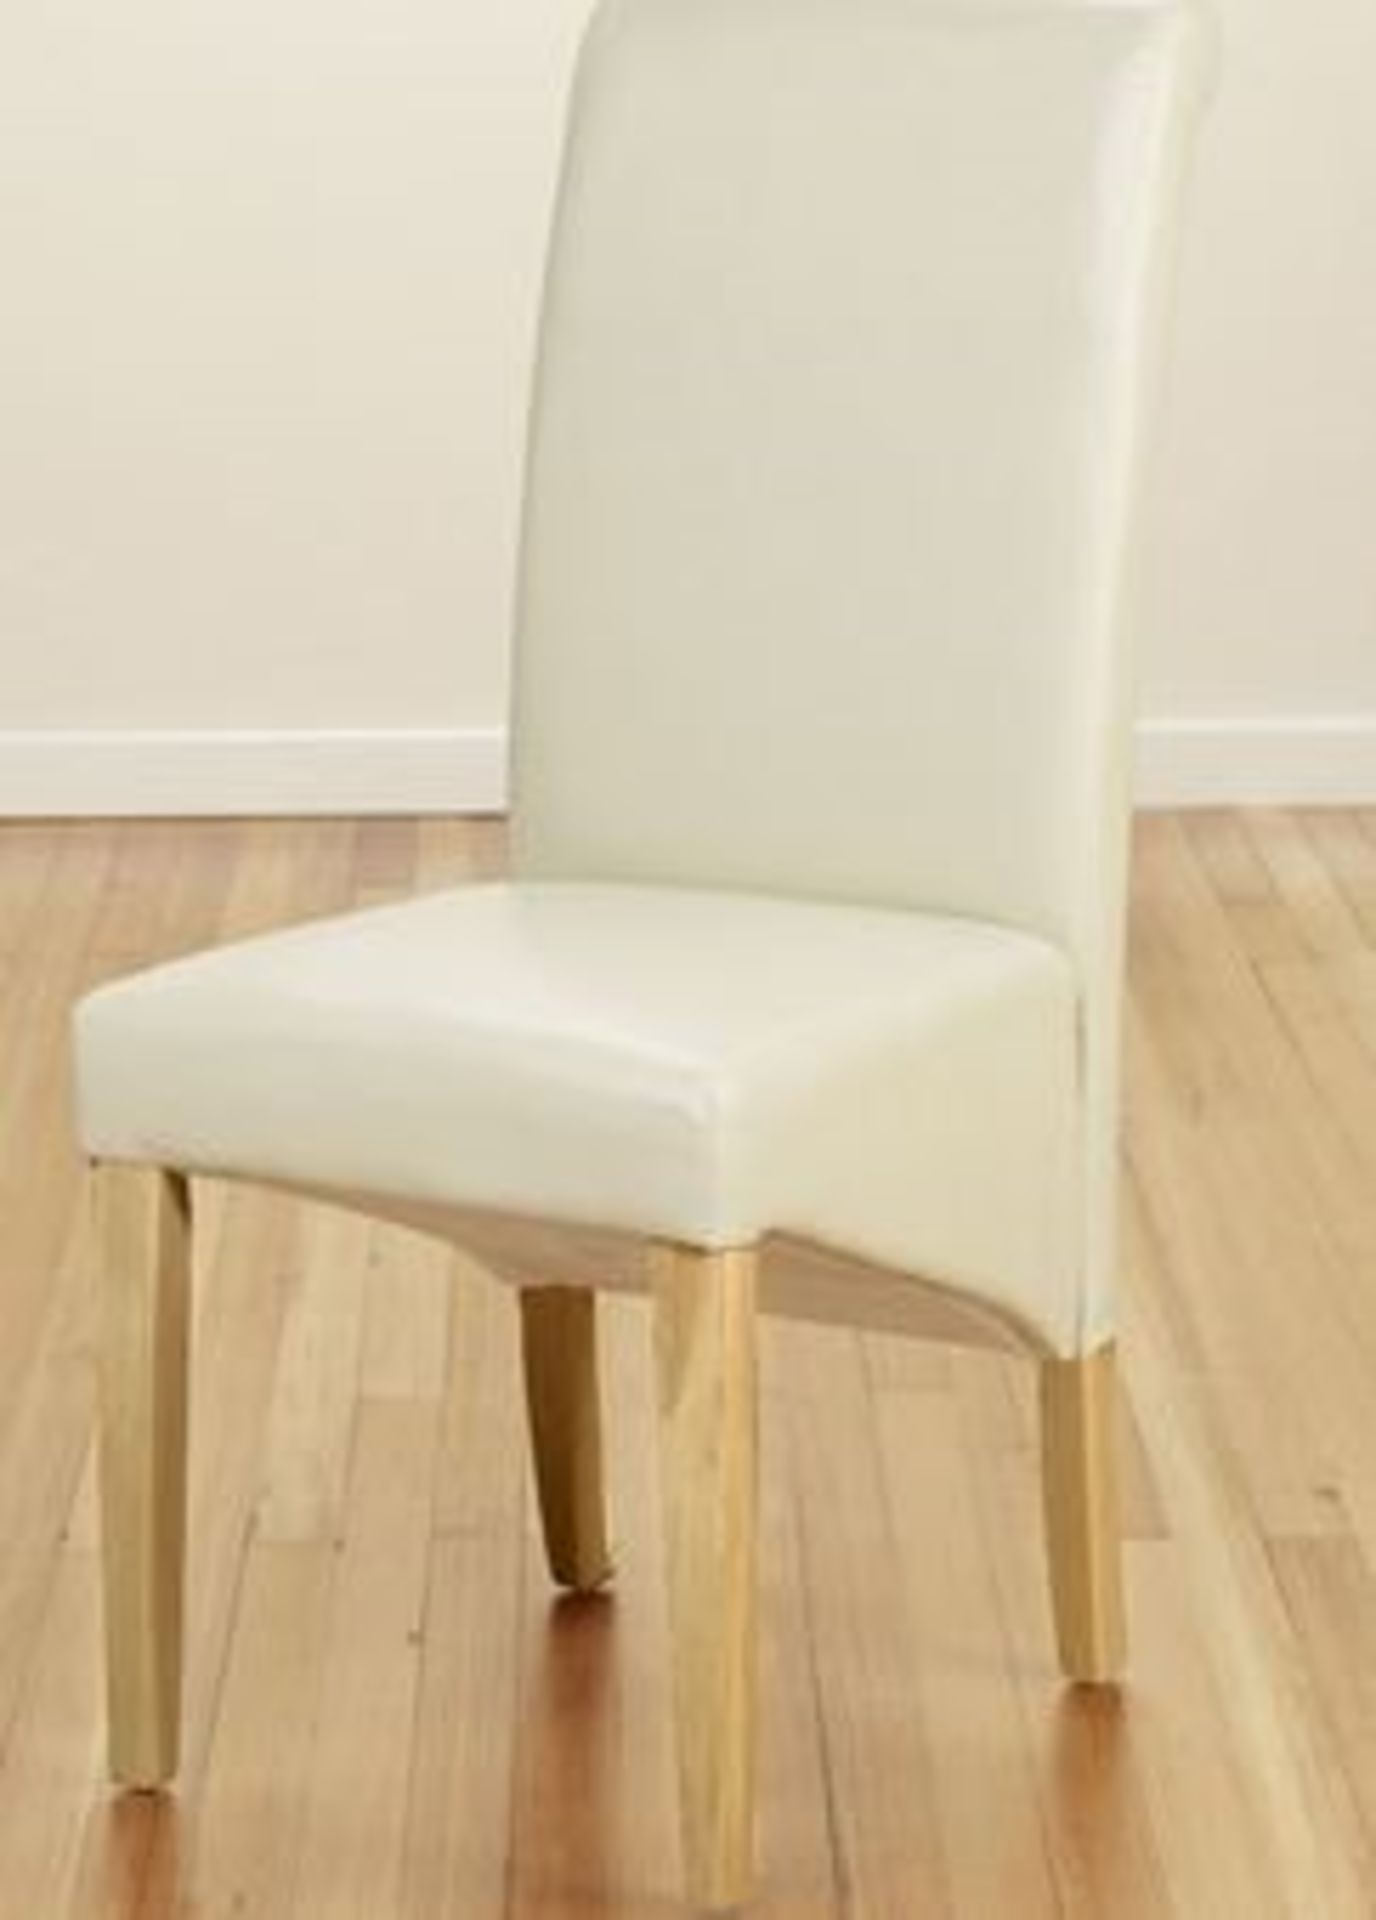 1 GRADE B BOXED IVORY FAUX LEATHER DINING CHAIR, LIGHT LEGS *SLIGHT DAMAGE TO BOX* (VIEWING HIGHLY